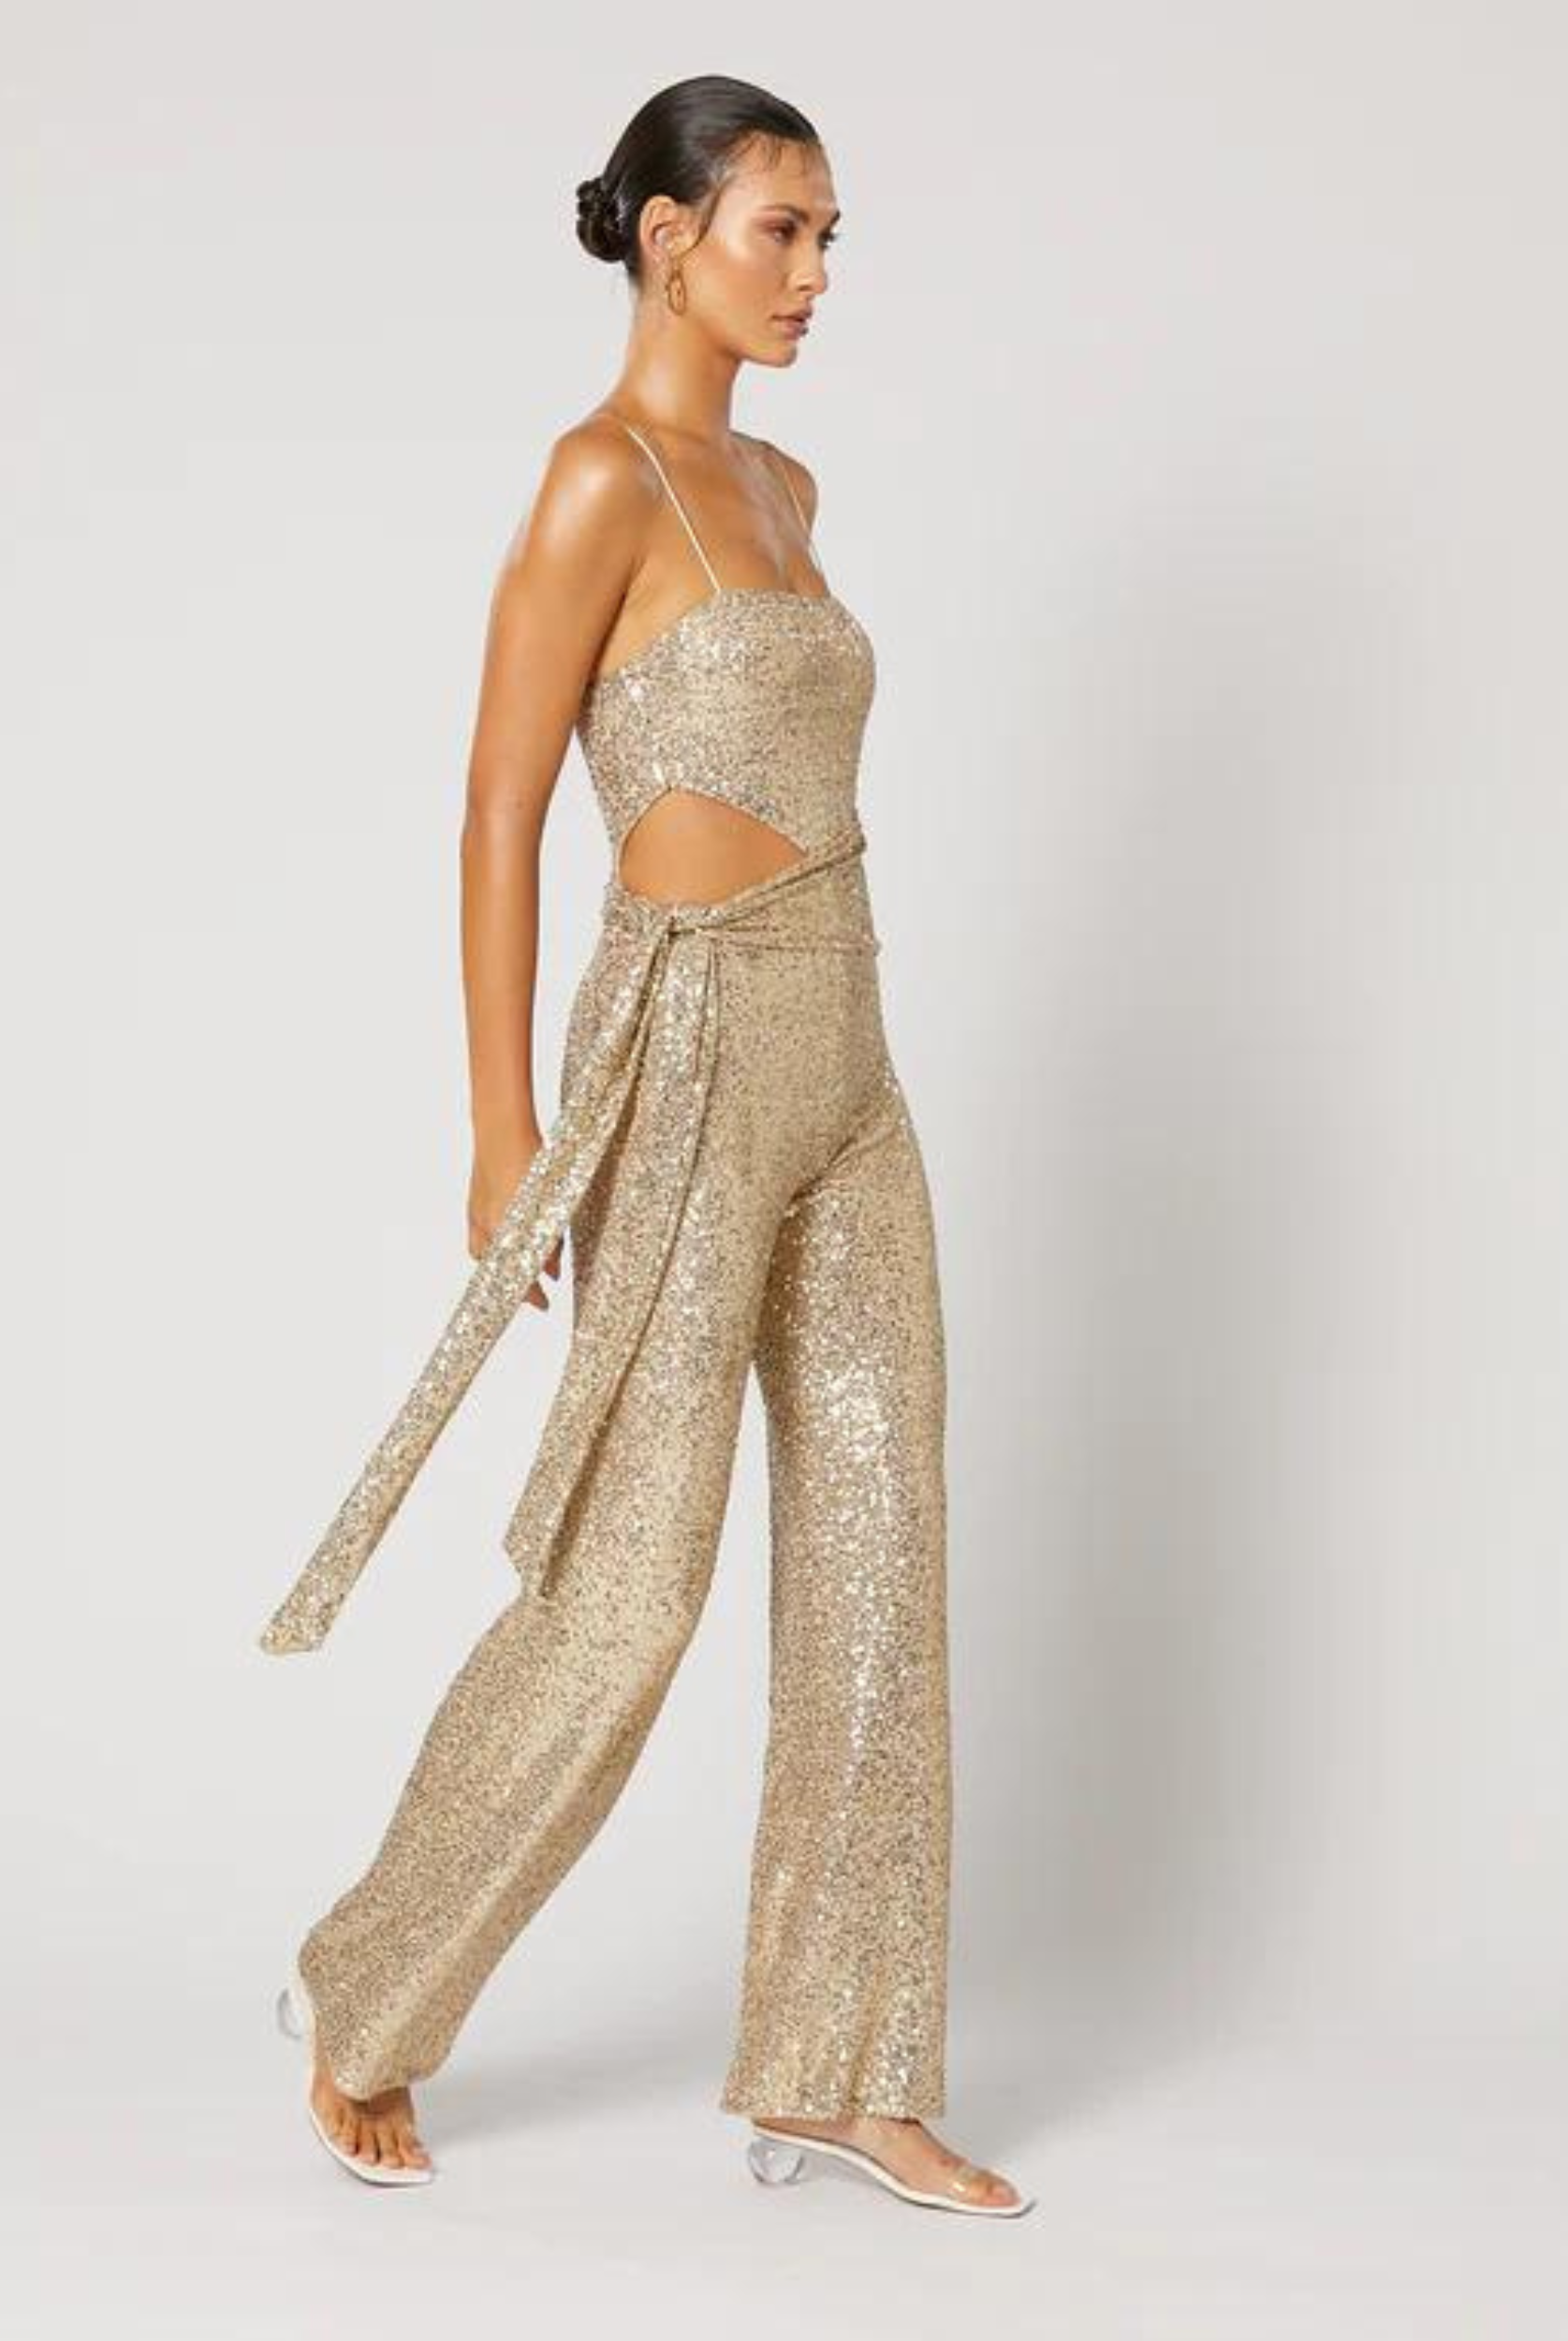 Strappy Sequin Gold Jumpsuit with cut out and sash tie perfect for your next event